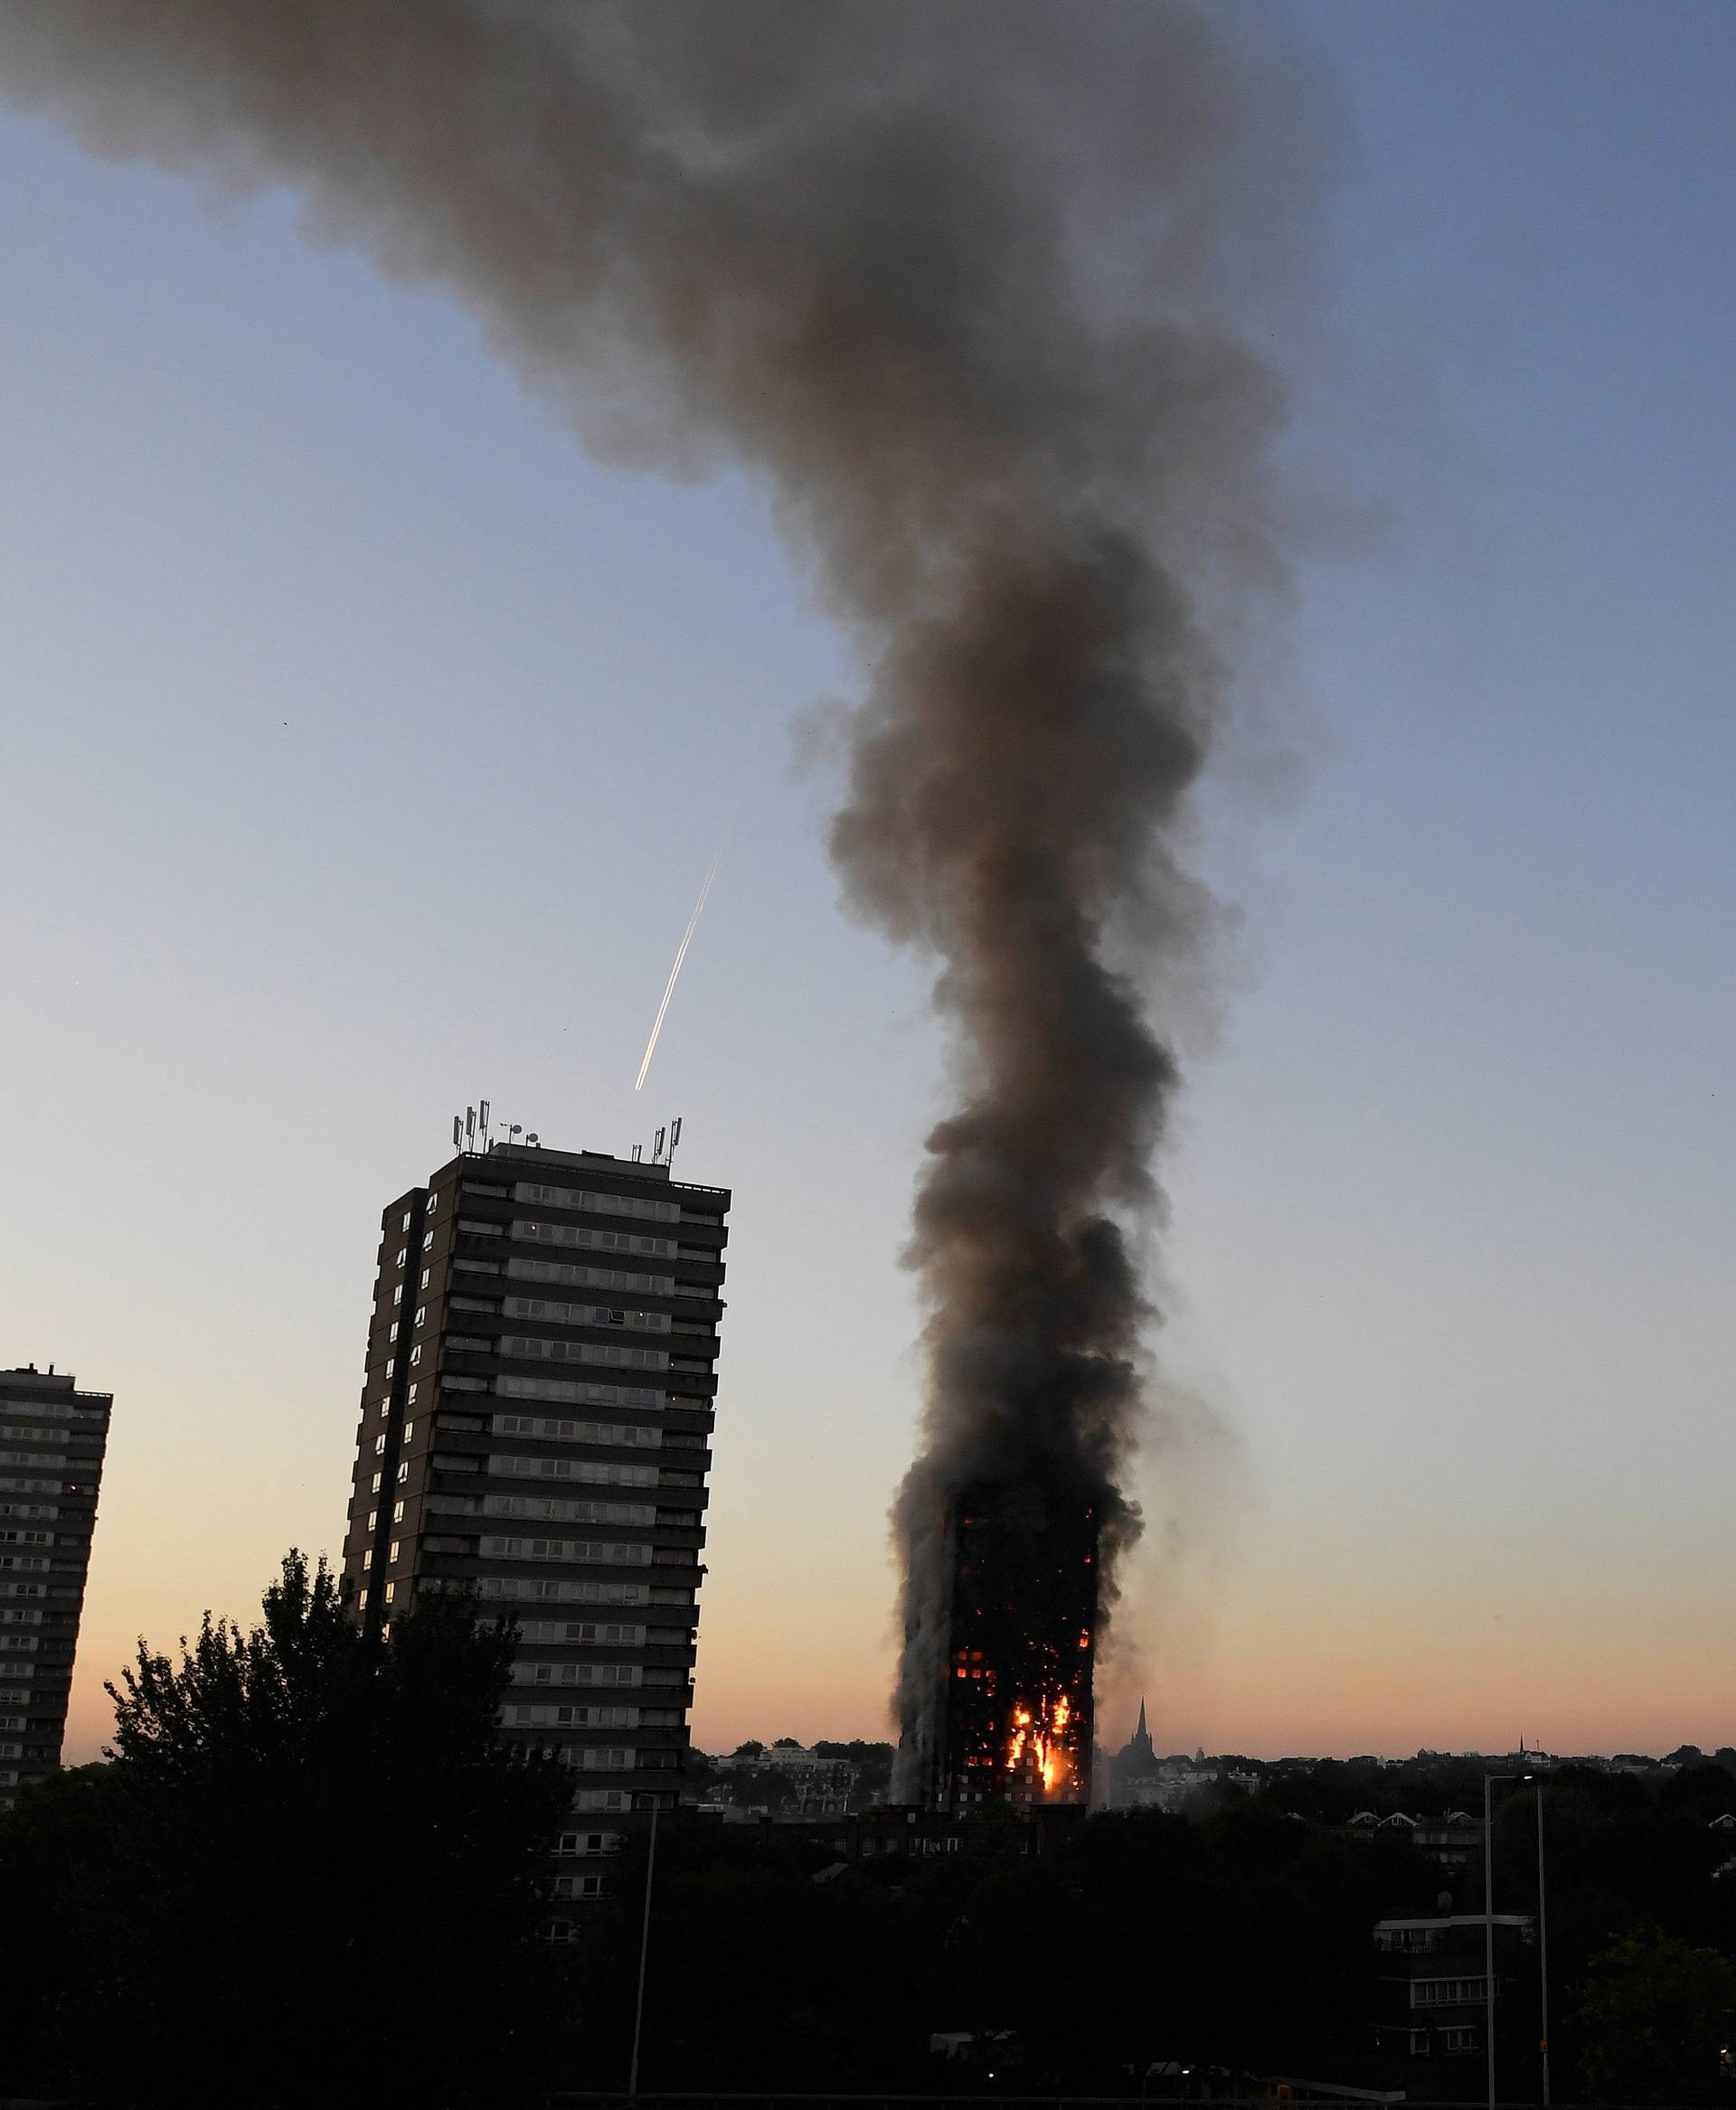 Flames and smoke billow as firefighters deal with a serious fire in a tower block at Latimer Road in West London